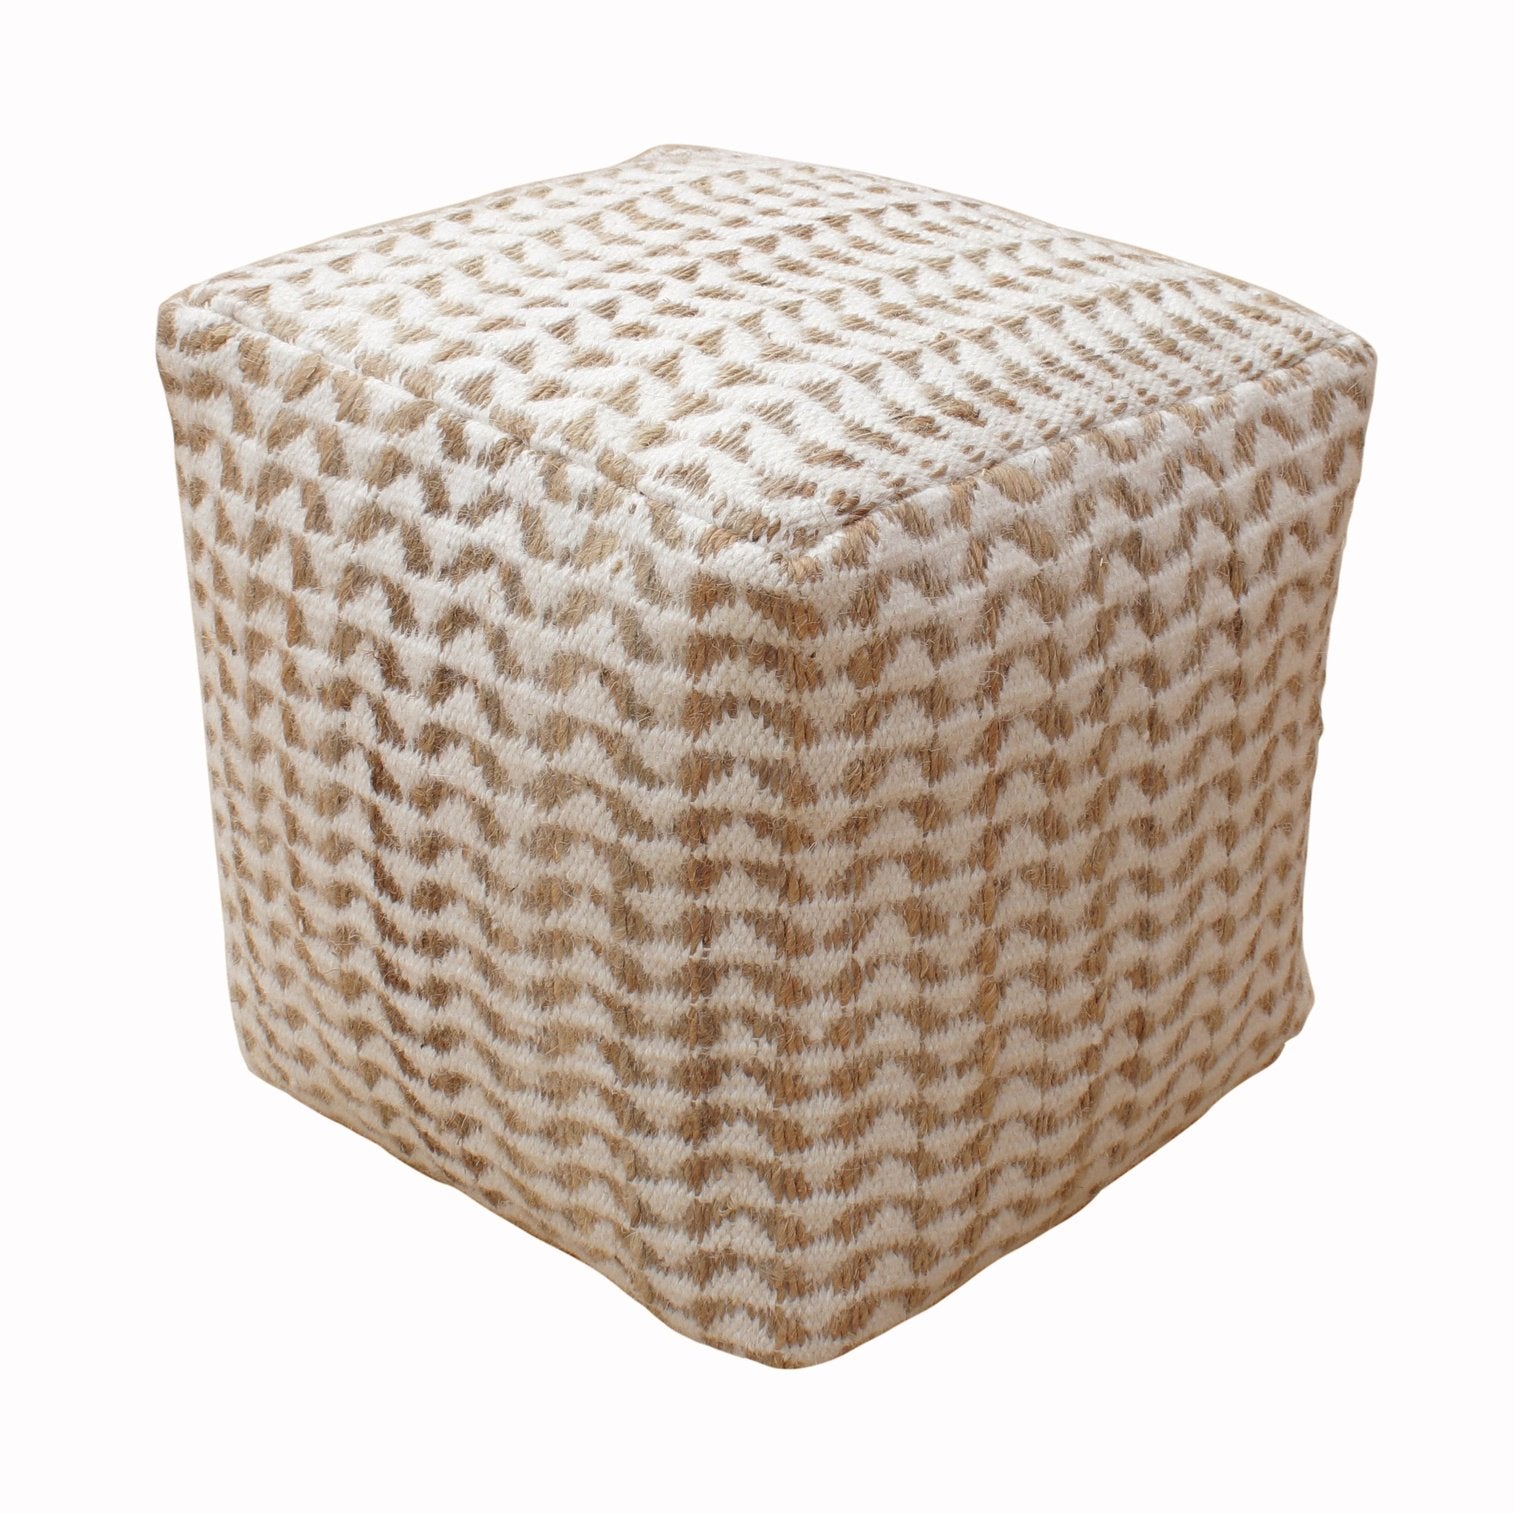 Basset Hand Woven Natural & Ivory 40x40cm Jute and Wool Pouffe